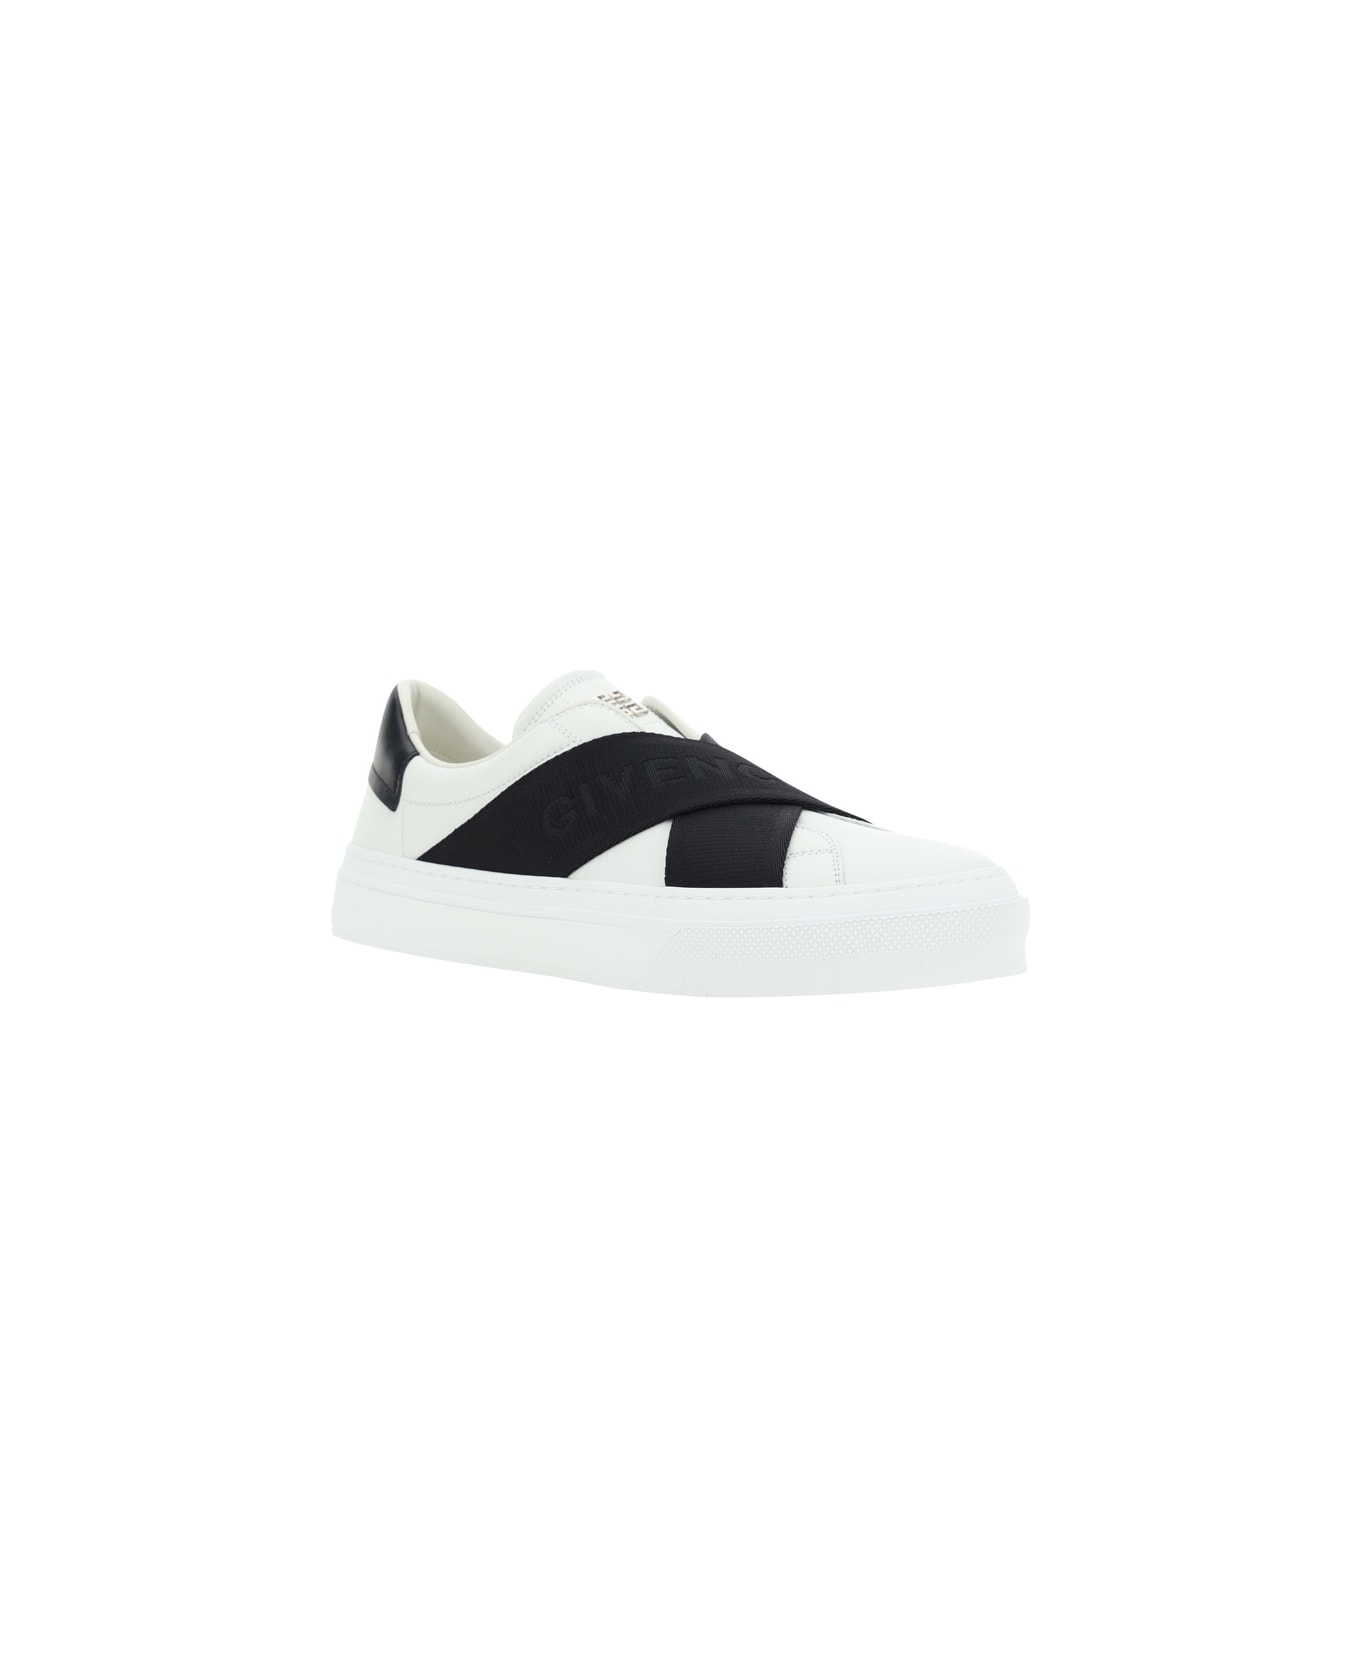 Givenchy City Sport Leather Sneakers - White/black